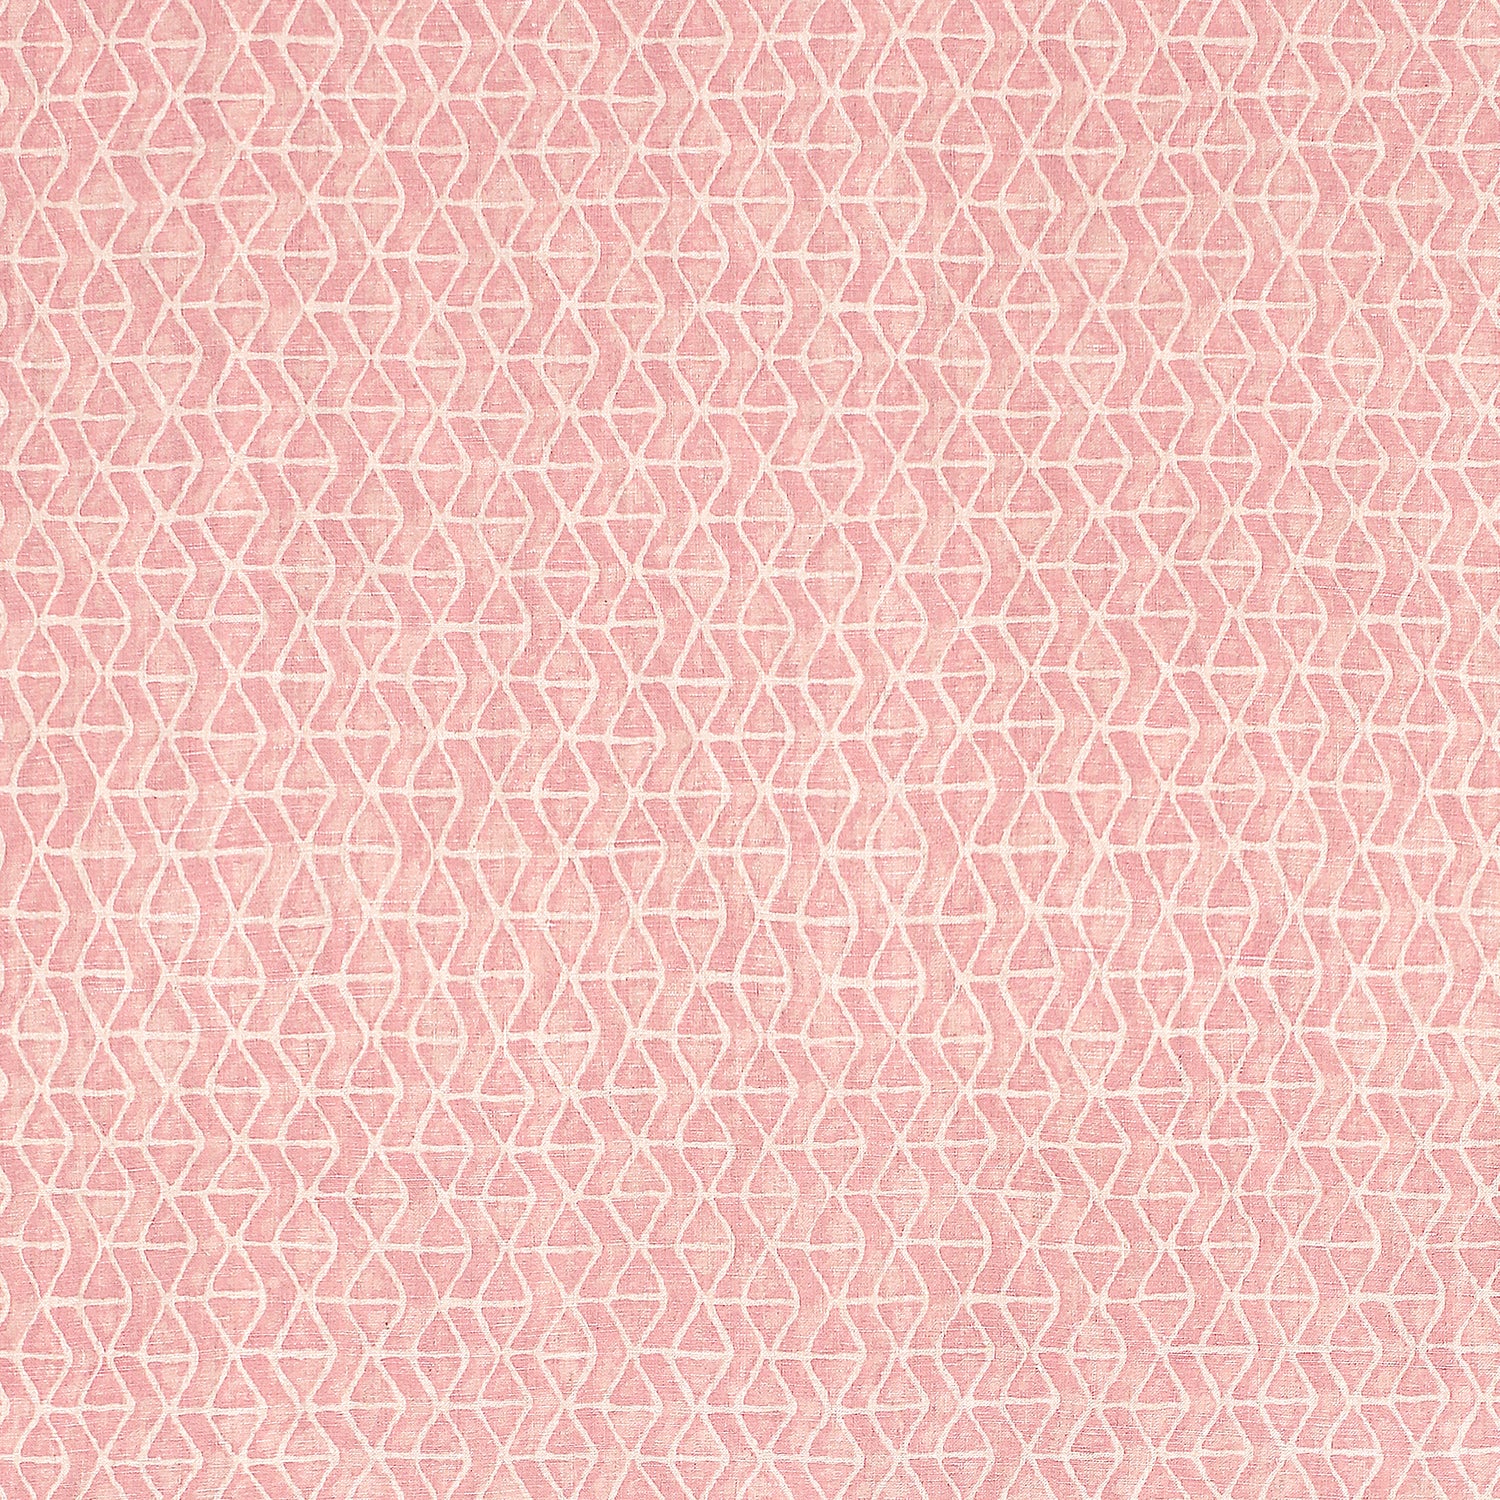 Stony Brook fabric in blush color - pattern number F942001 - by Thibaut in the Sojourn collection